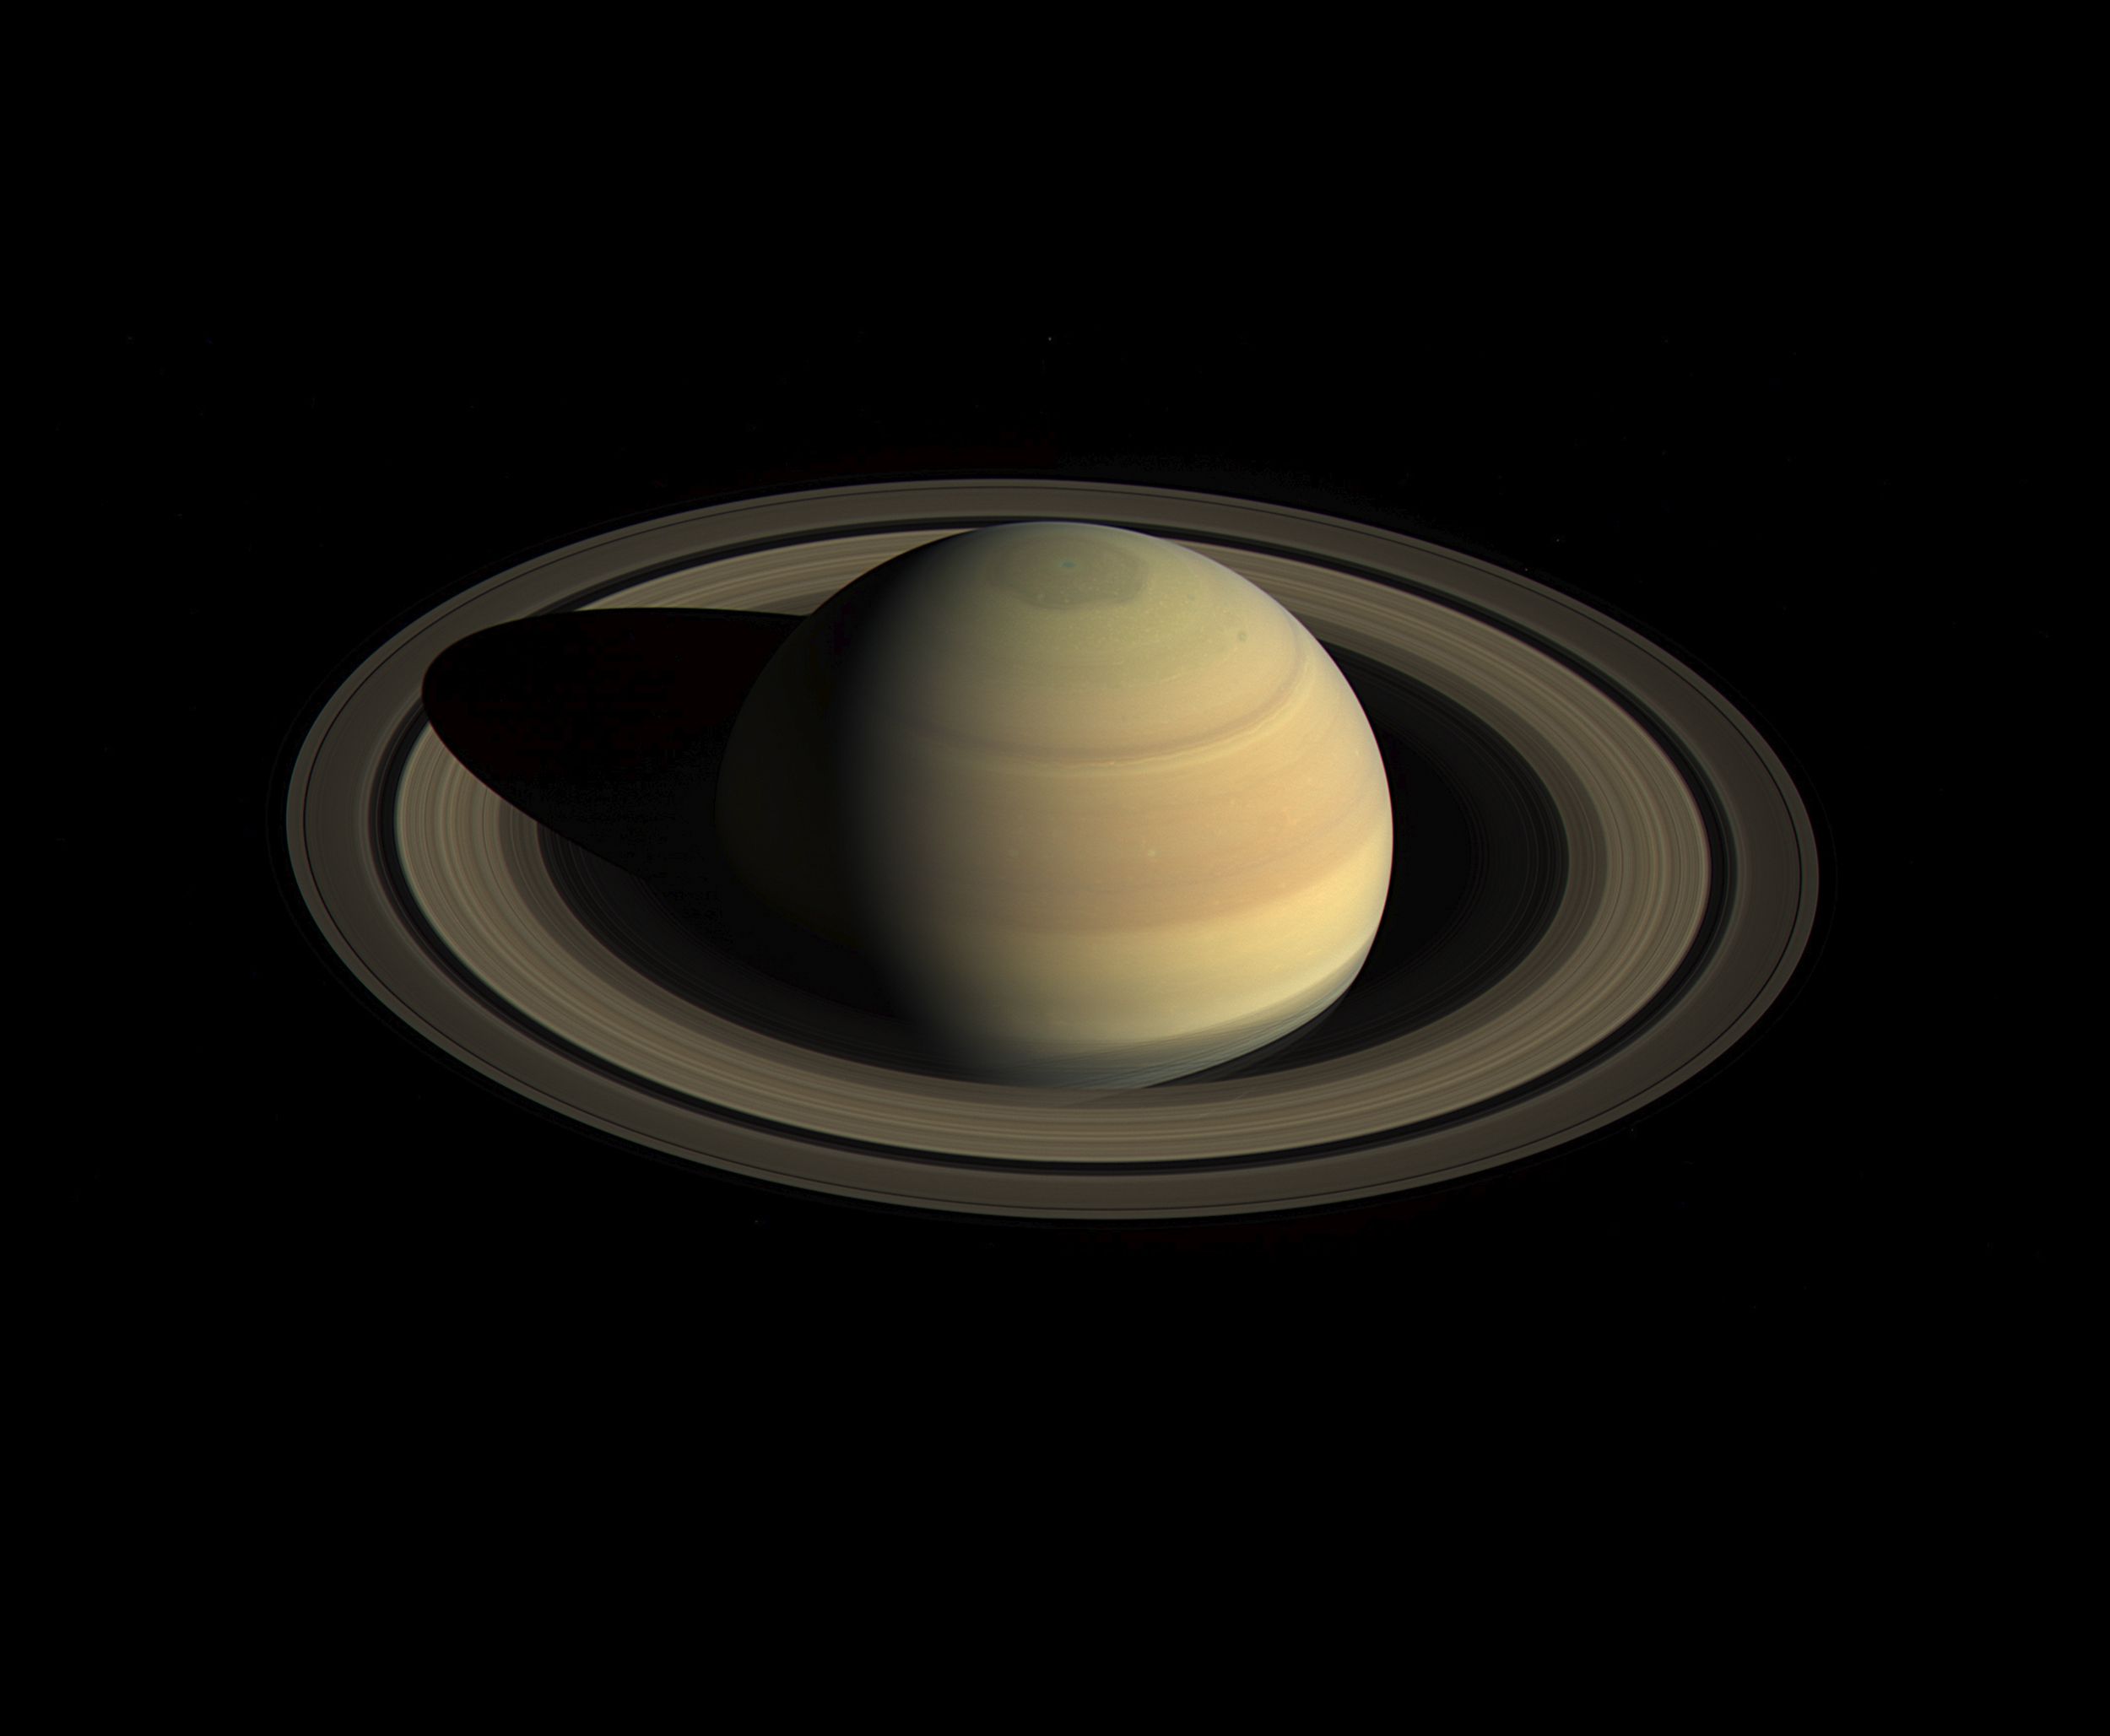 Nasa S Cassini Spacecraft The Greatest Space Mission Of Our Time